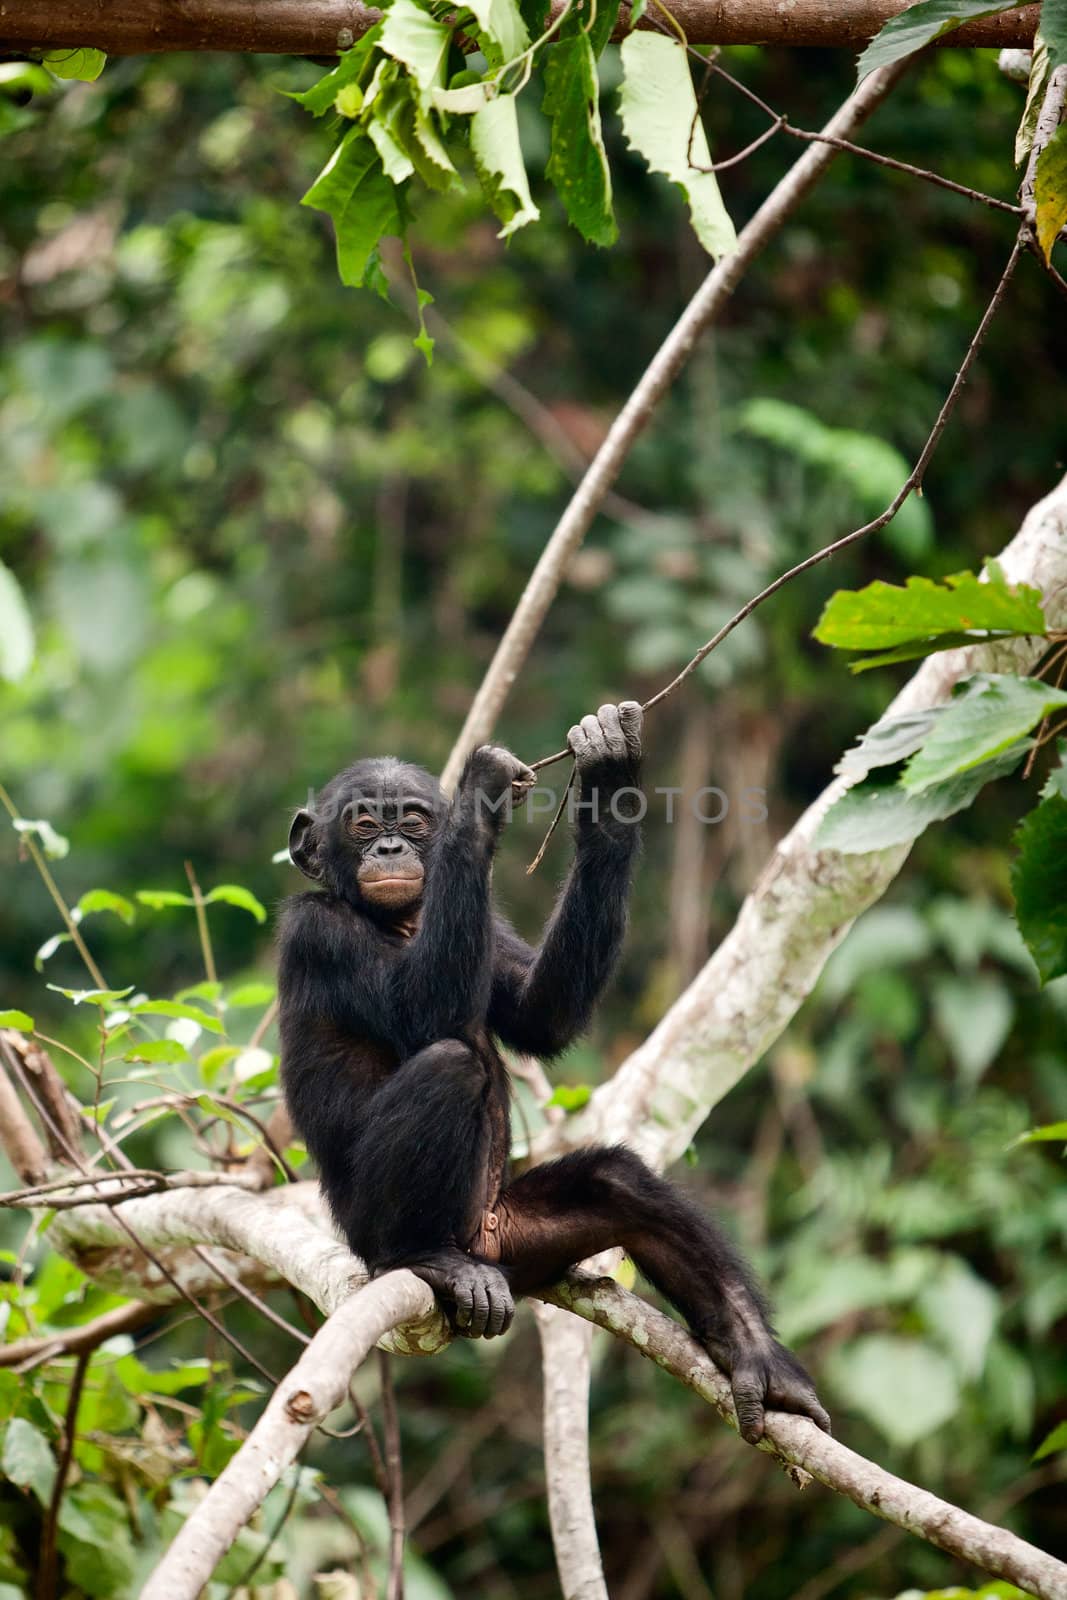  The cub Bonobo sits on a tree branch. Congo. Africa